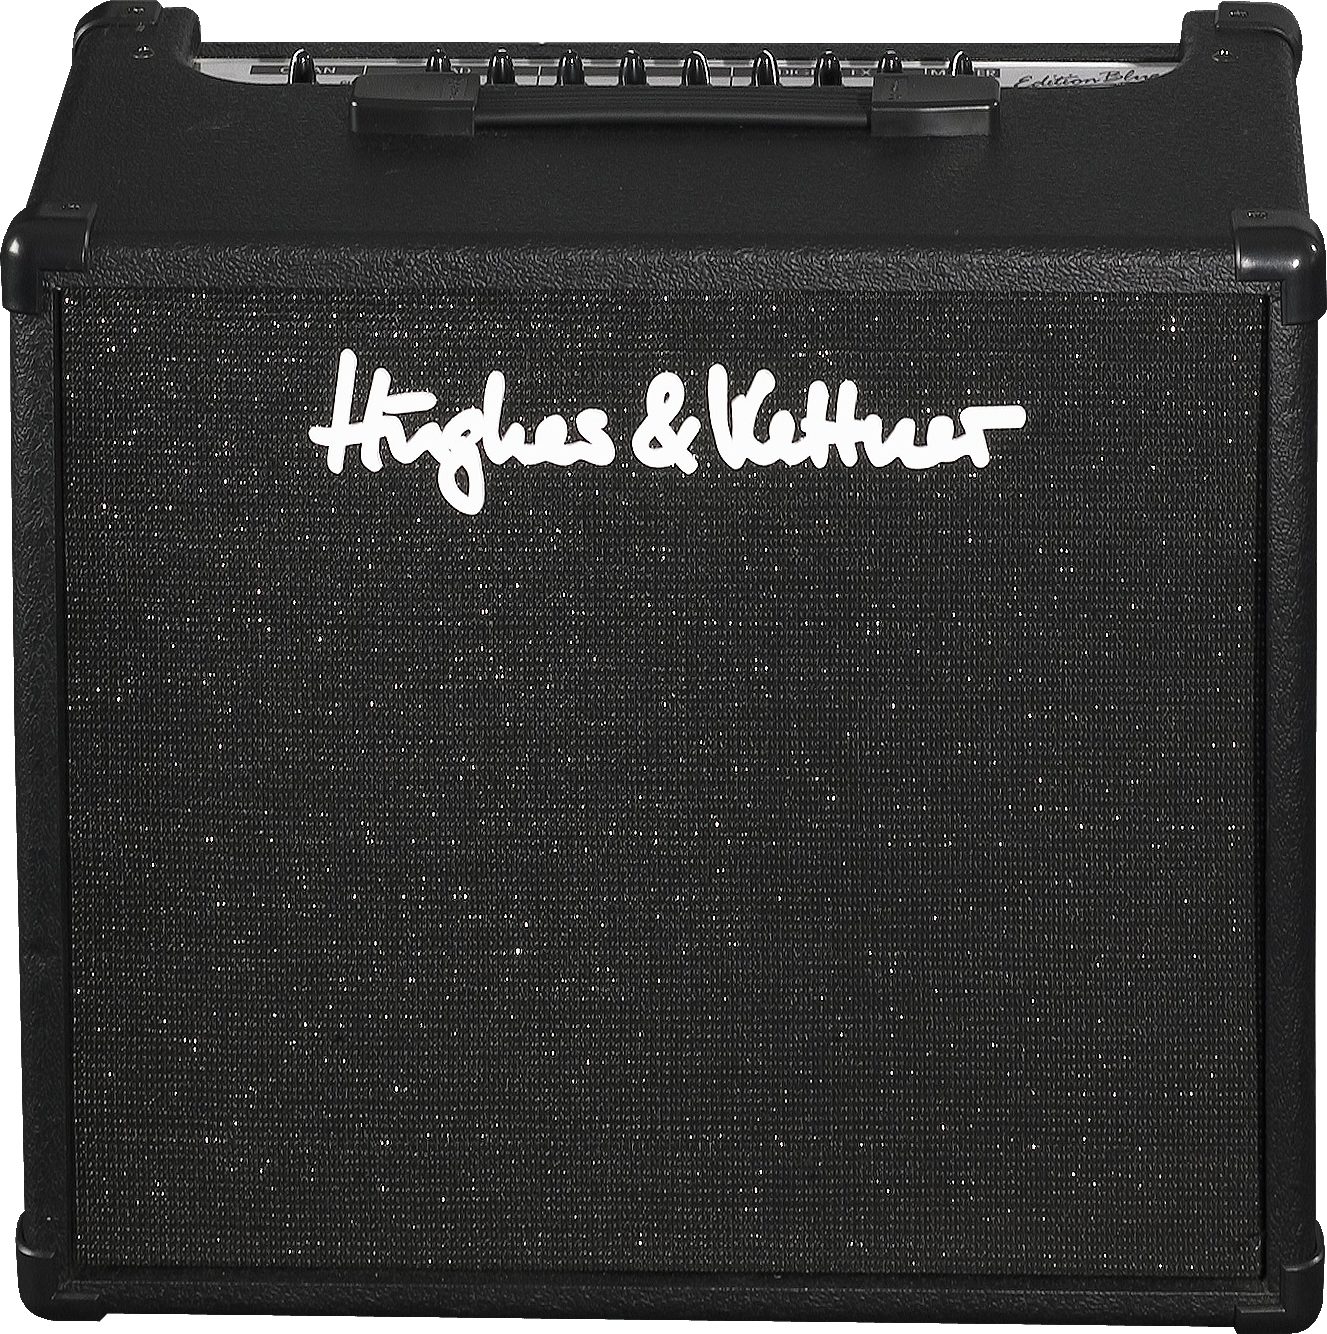 Hughes and Kettner Edition Blue 60 DFX Guitar Combo Amplifier (60 